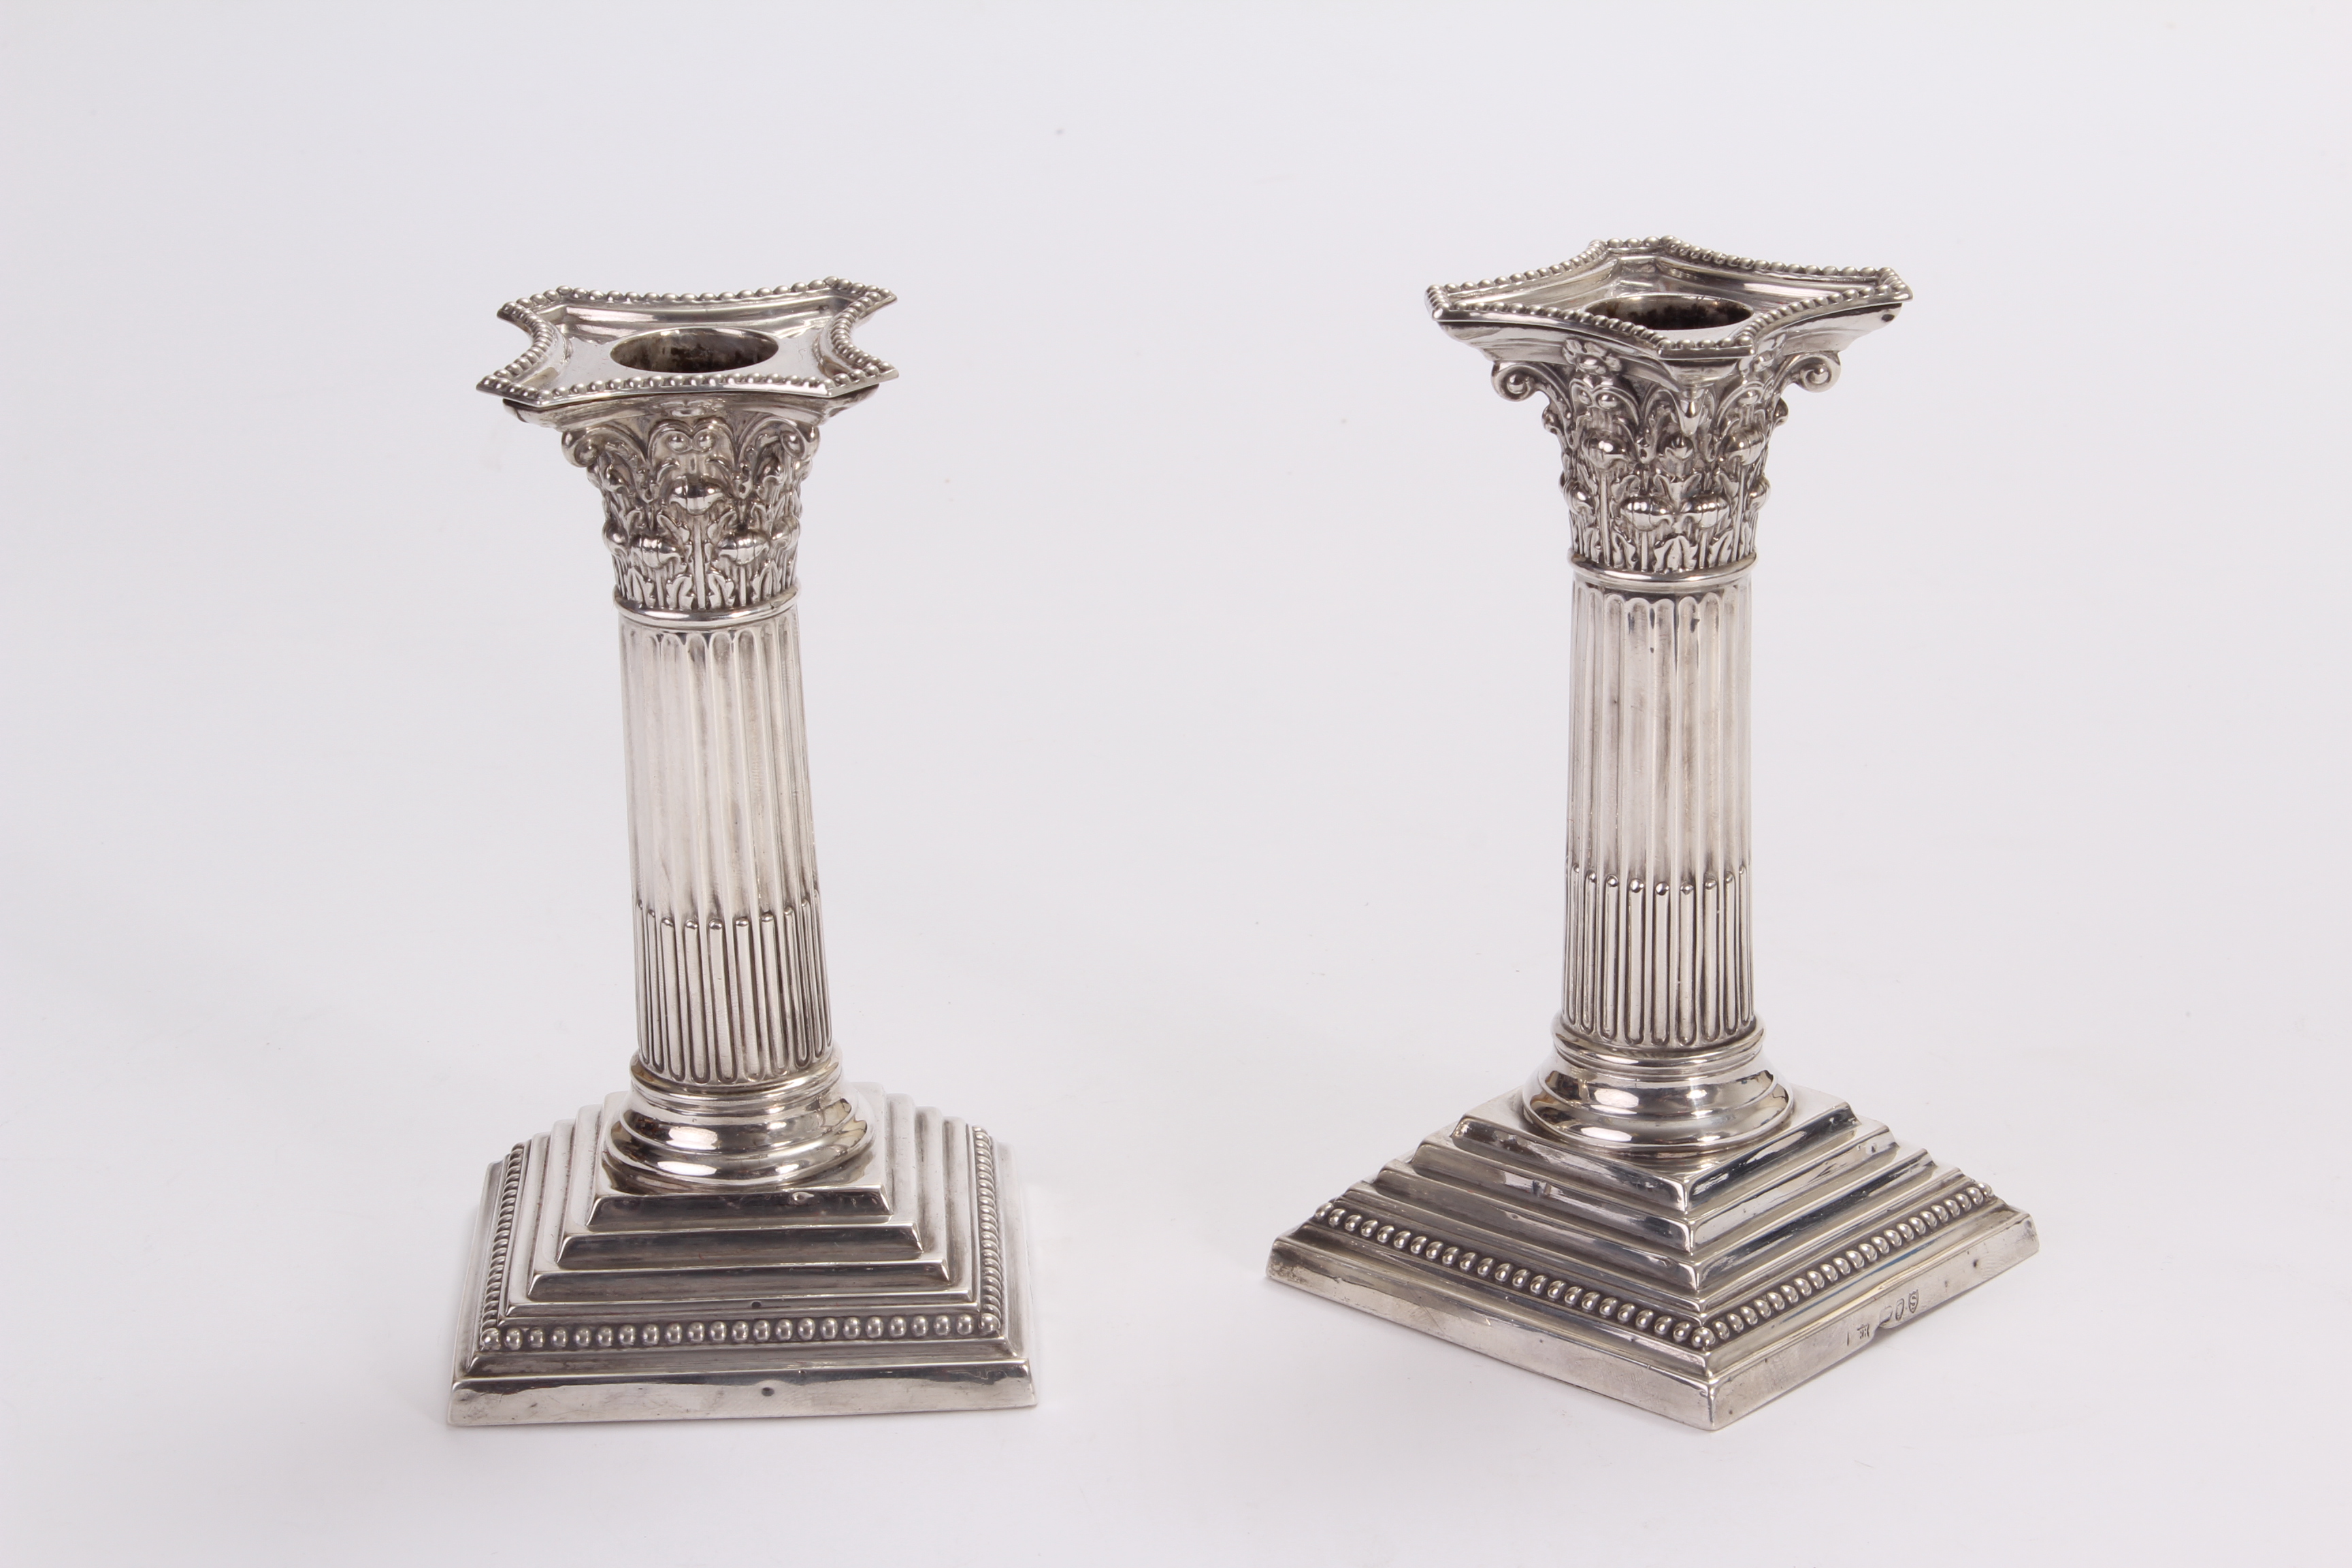 A pair of late Victorian silver filled candlesticks by Edward Hutton, having square bases supporting